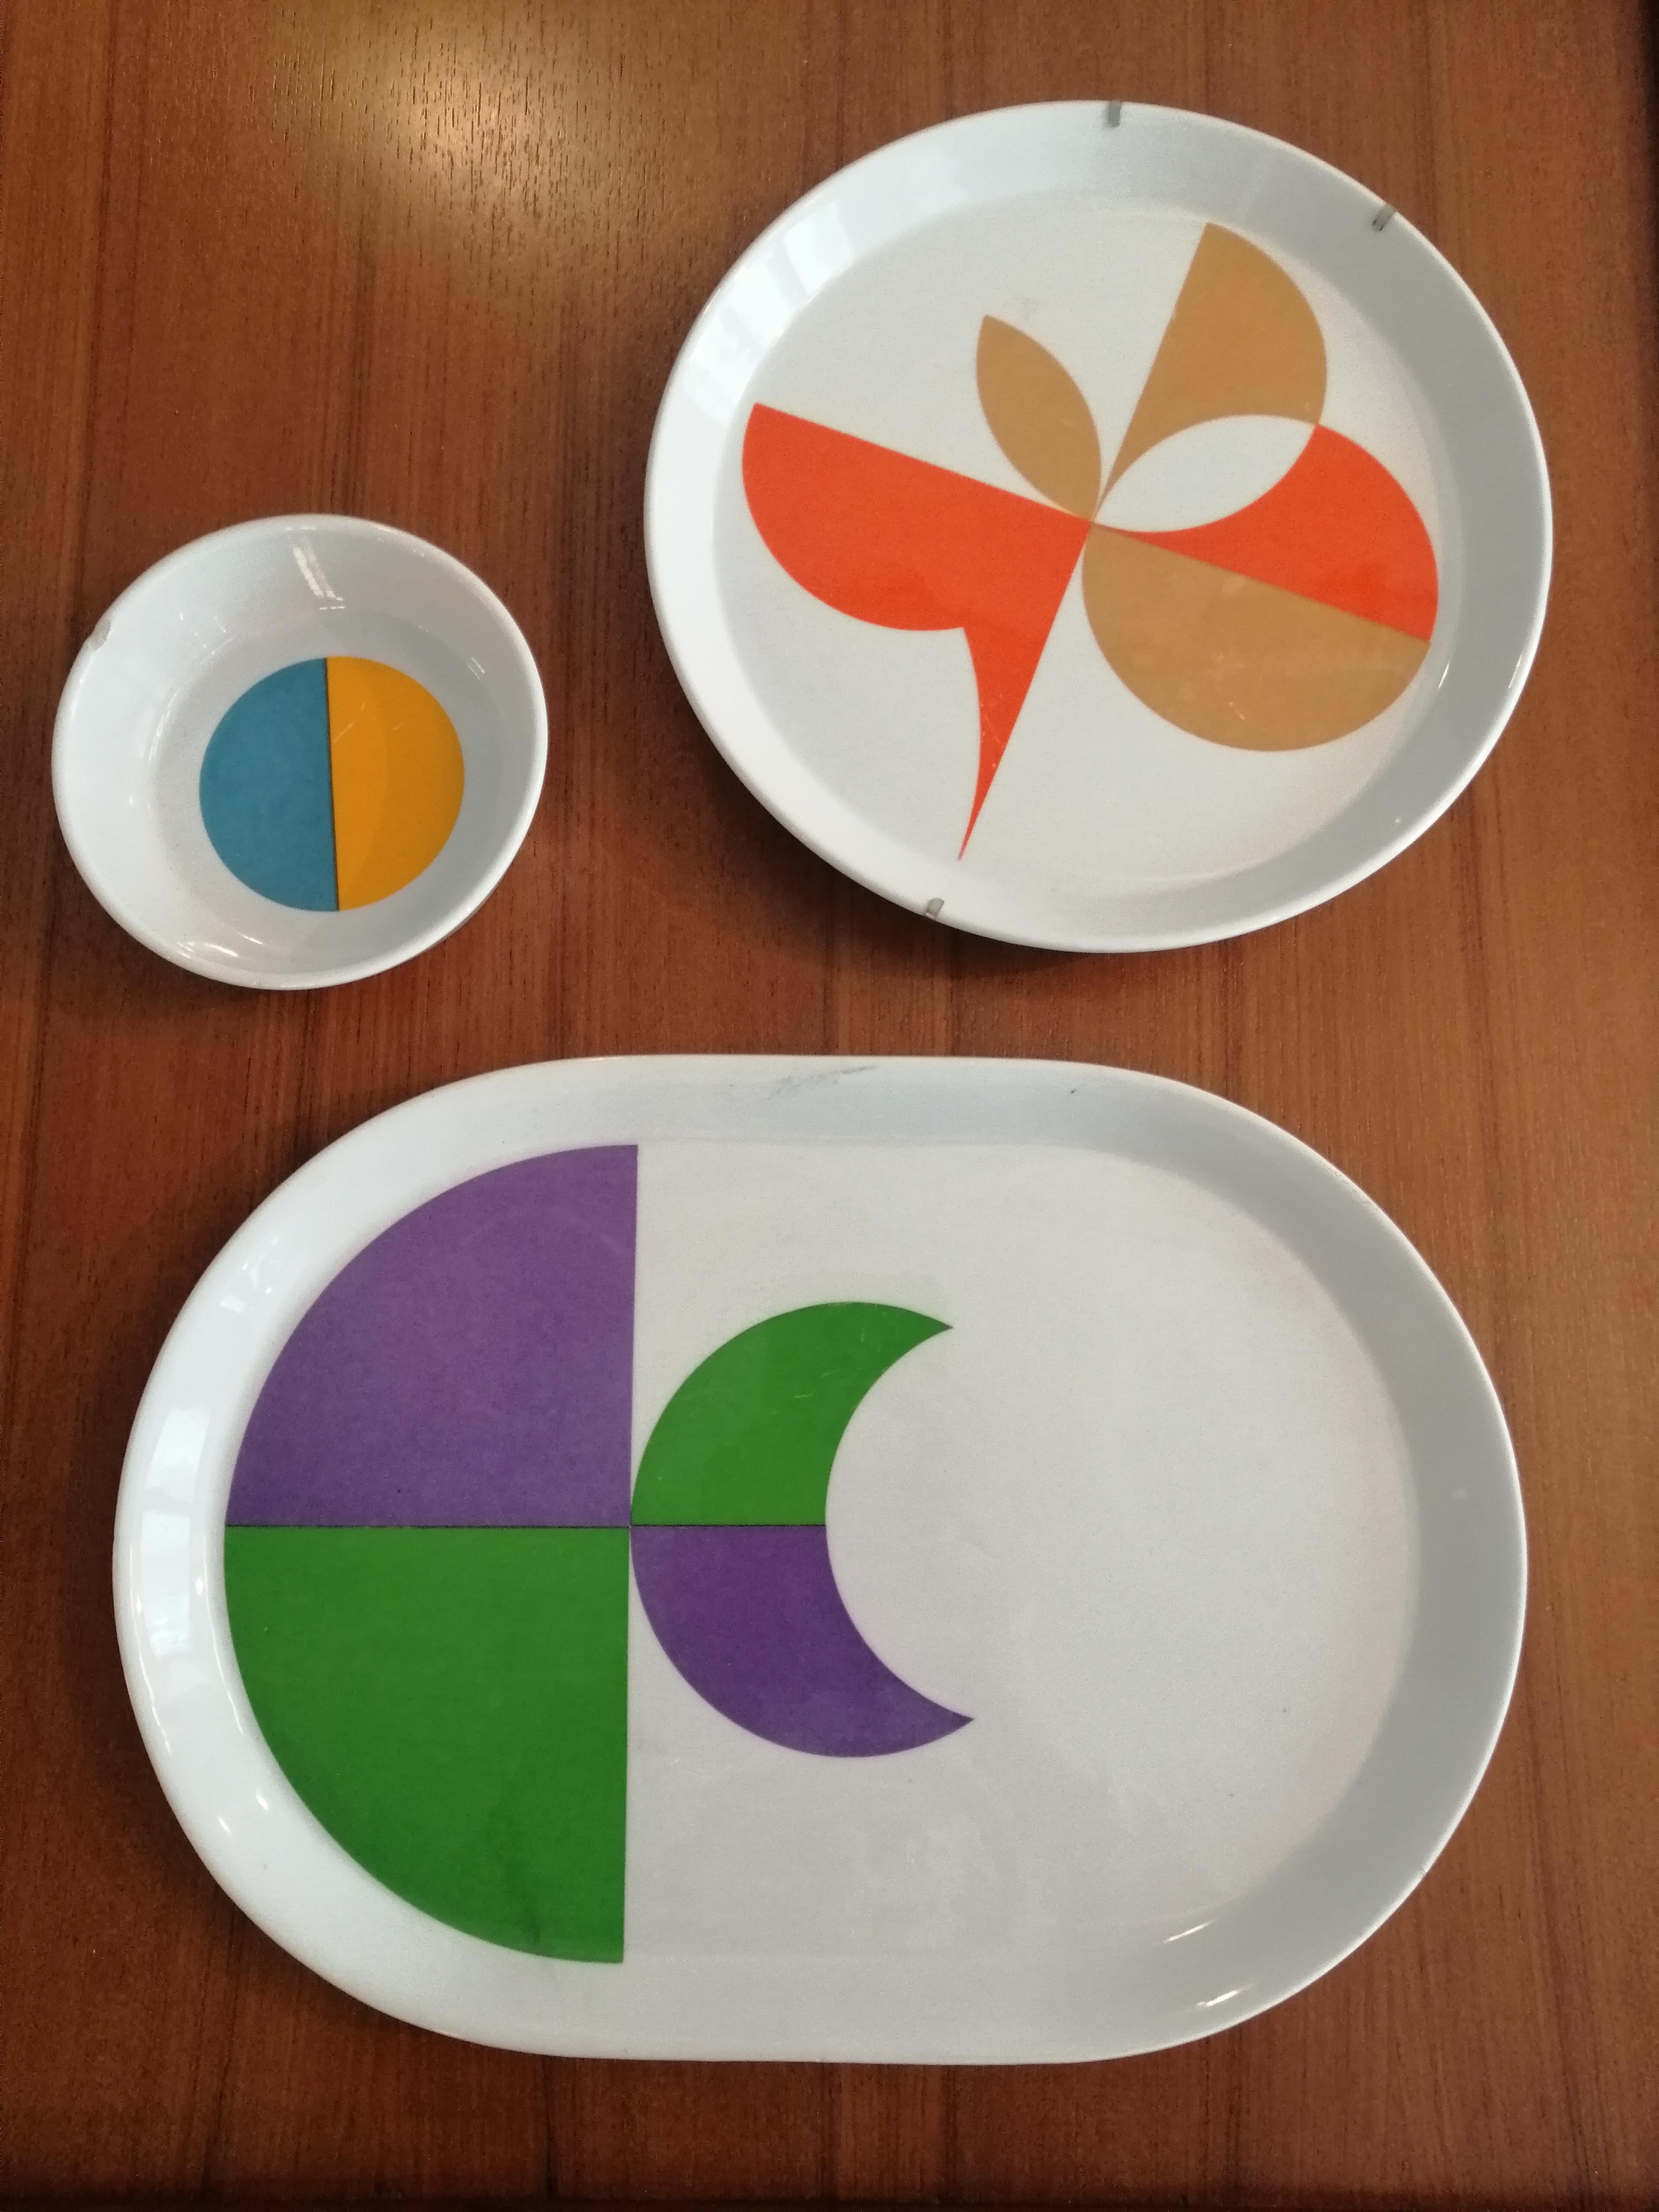 Silk-screened and glazed ceramic plates designed by Gio Ponti as part of the 